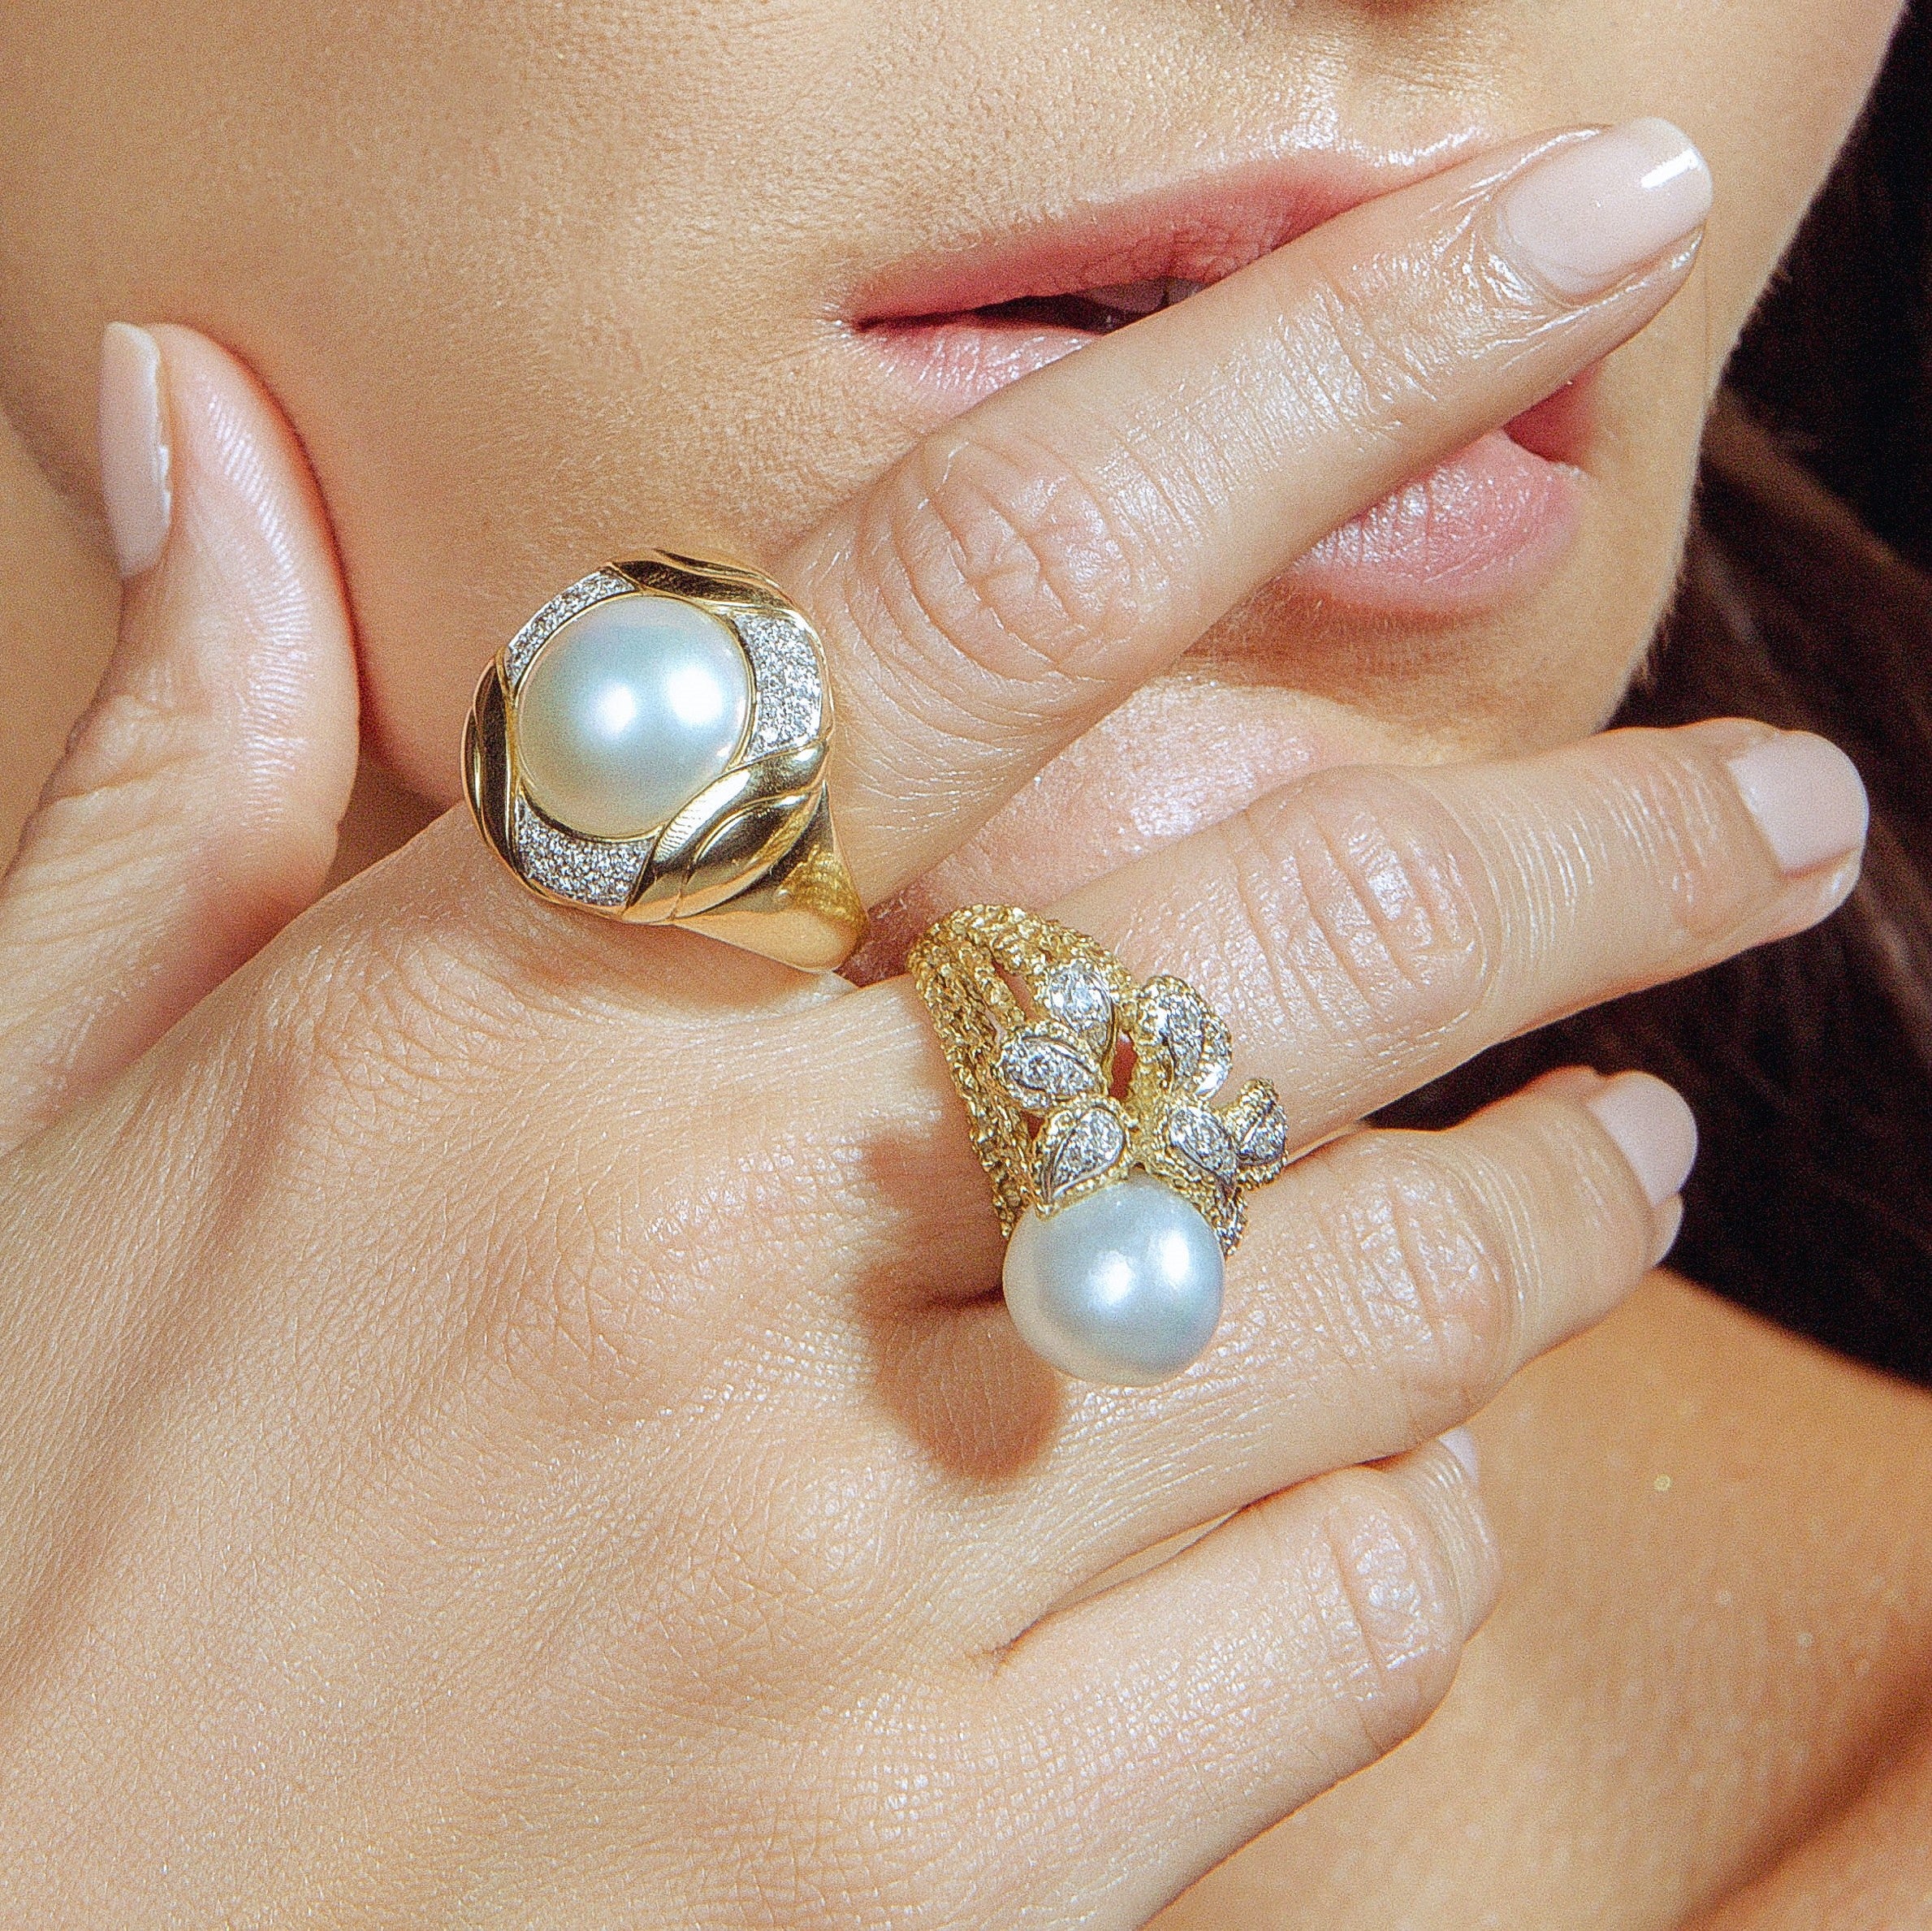 intage gold rings with pearls worn on a woman’s fingers.